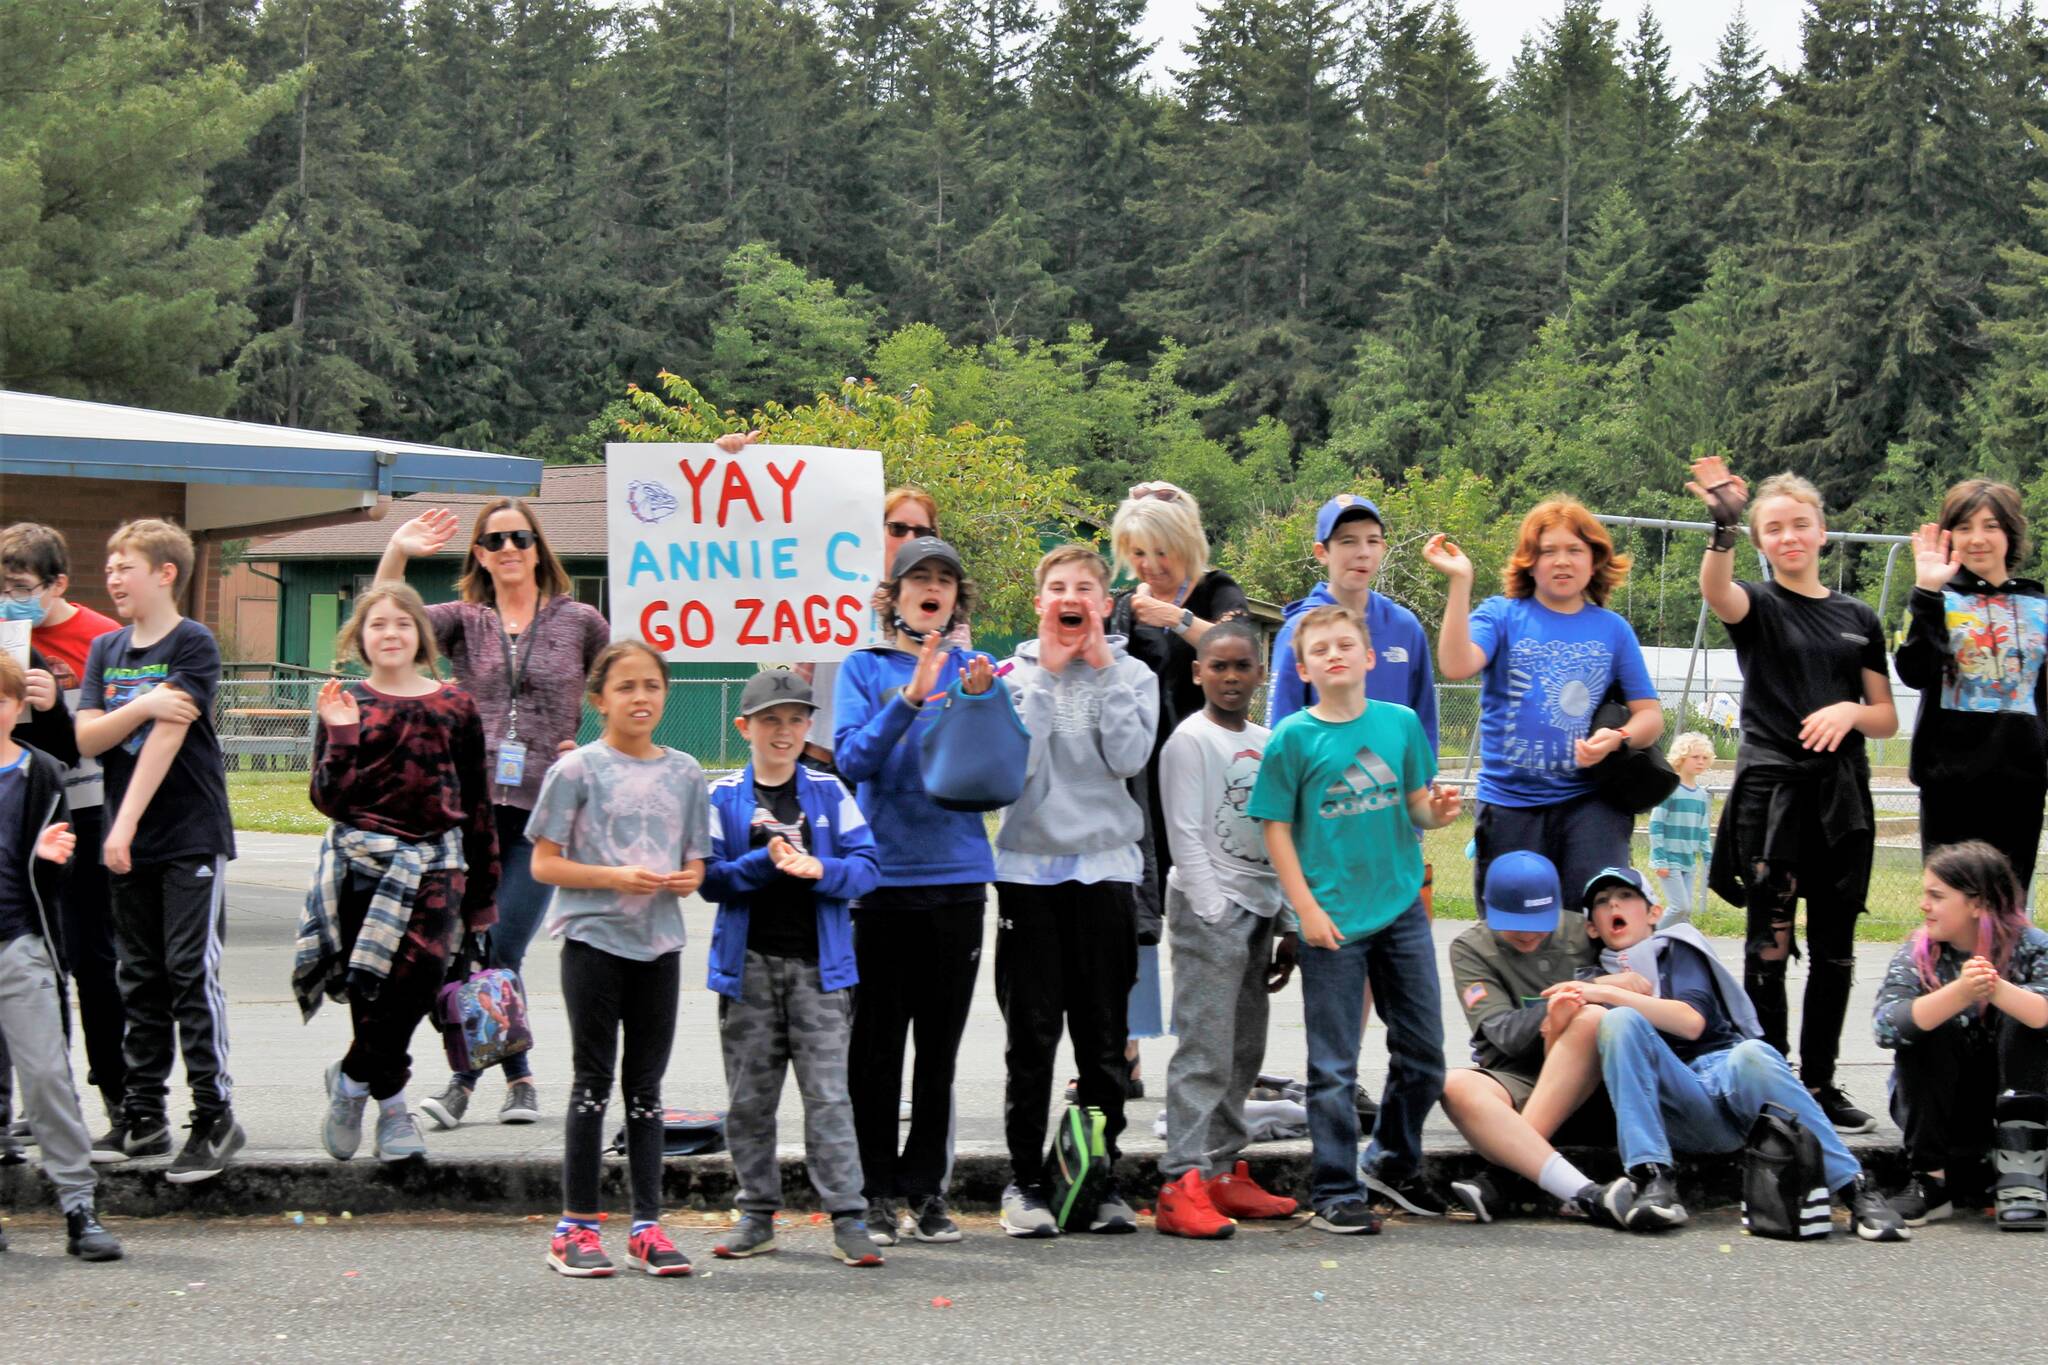 Children and faculty members standing outside of South Whidbey Elementary School cheered as the parade of high school seniors passed by them. (Photo by Kira Erickson/South Whidbey Record)